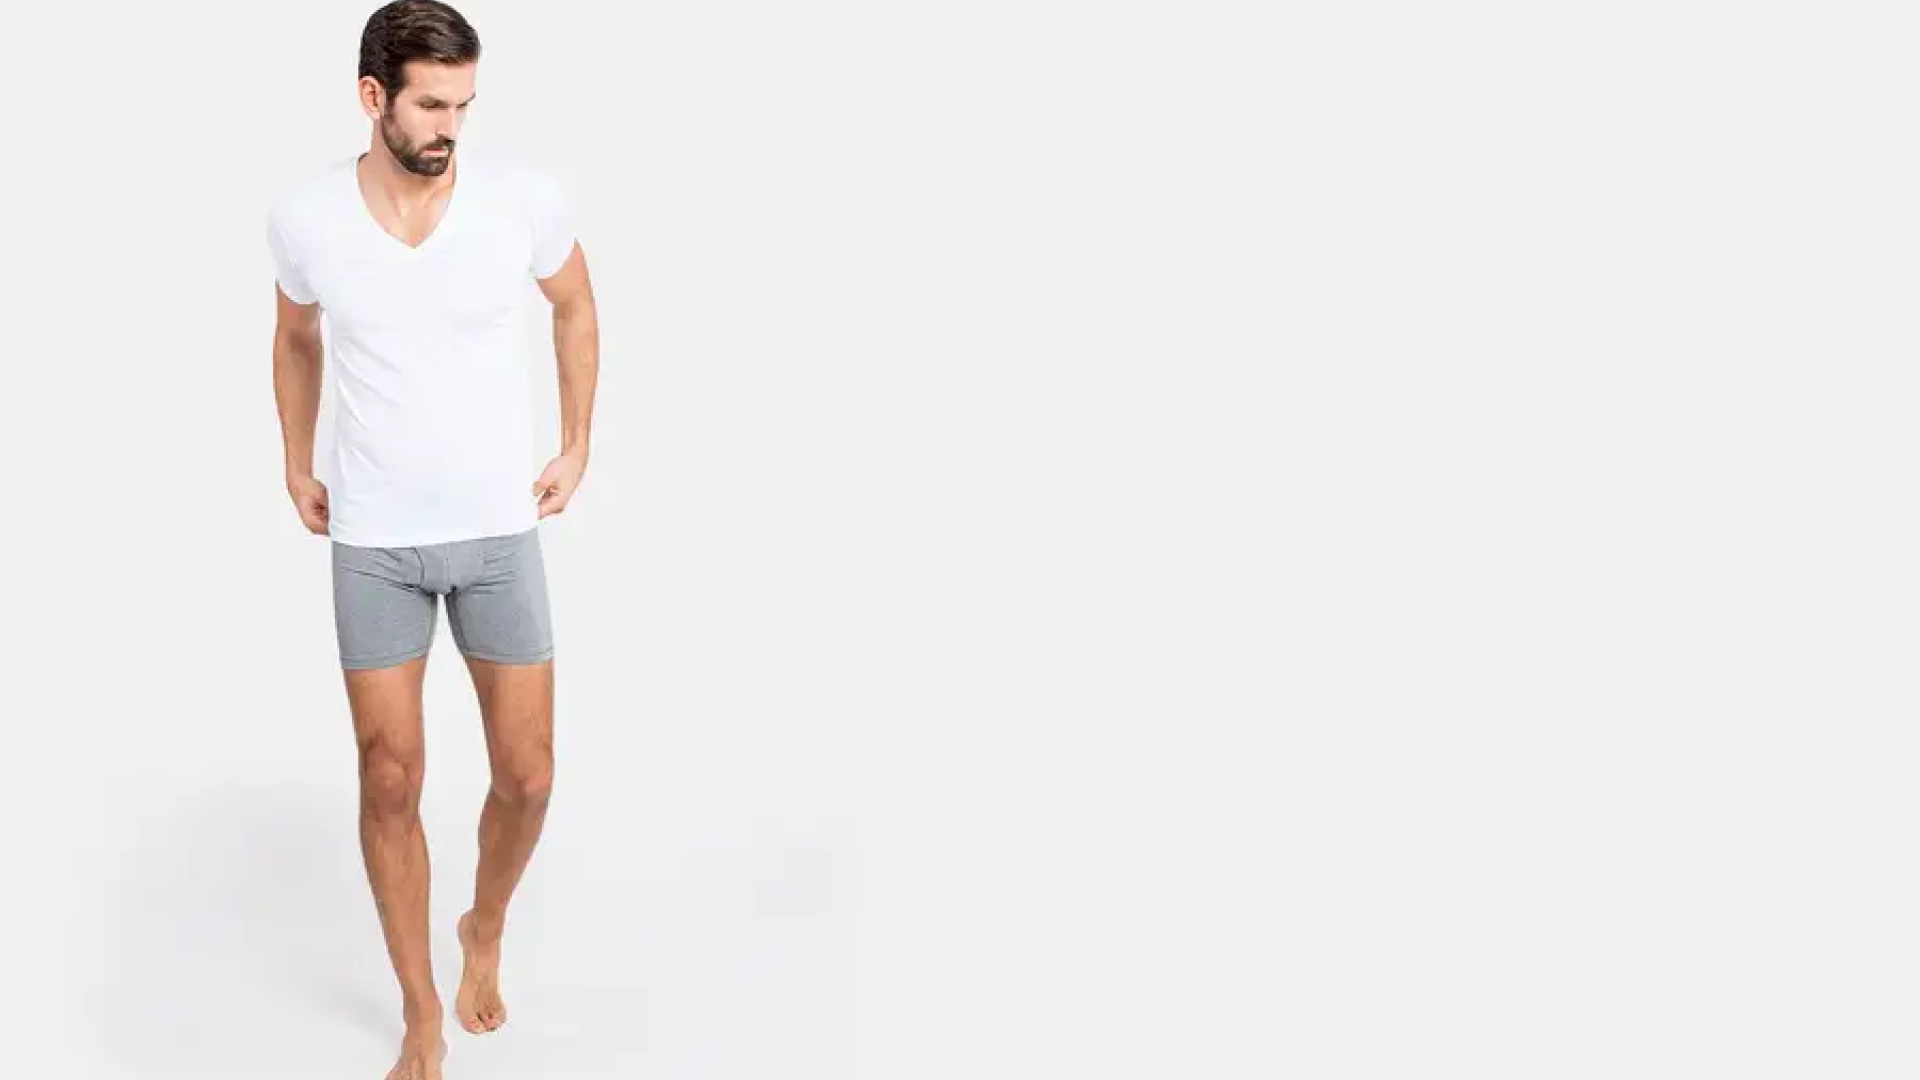 Men's Underwear: Styles & Fits For Every Guy